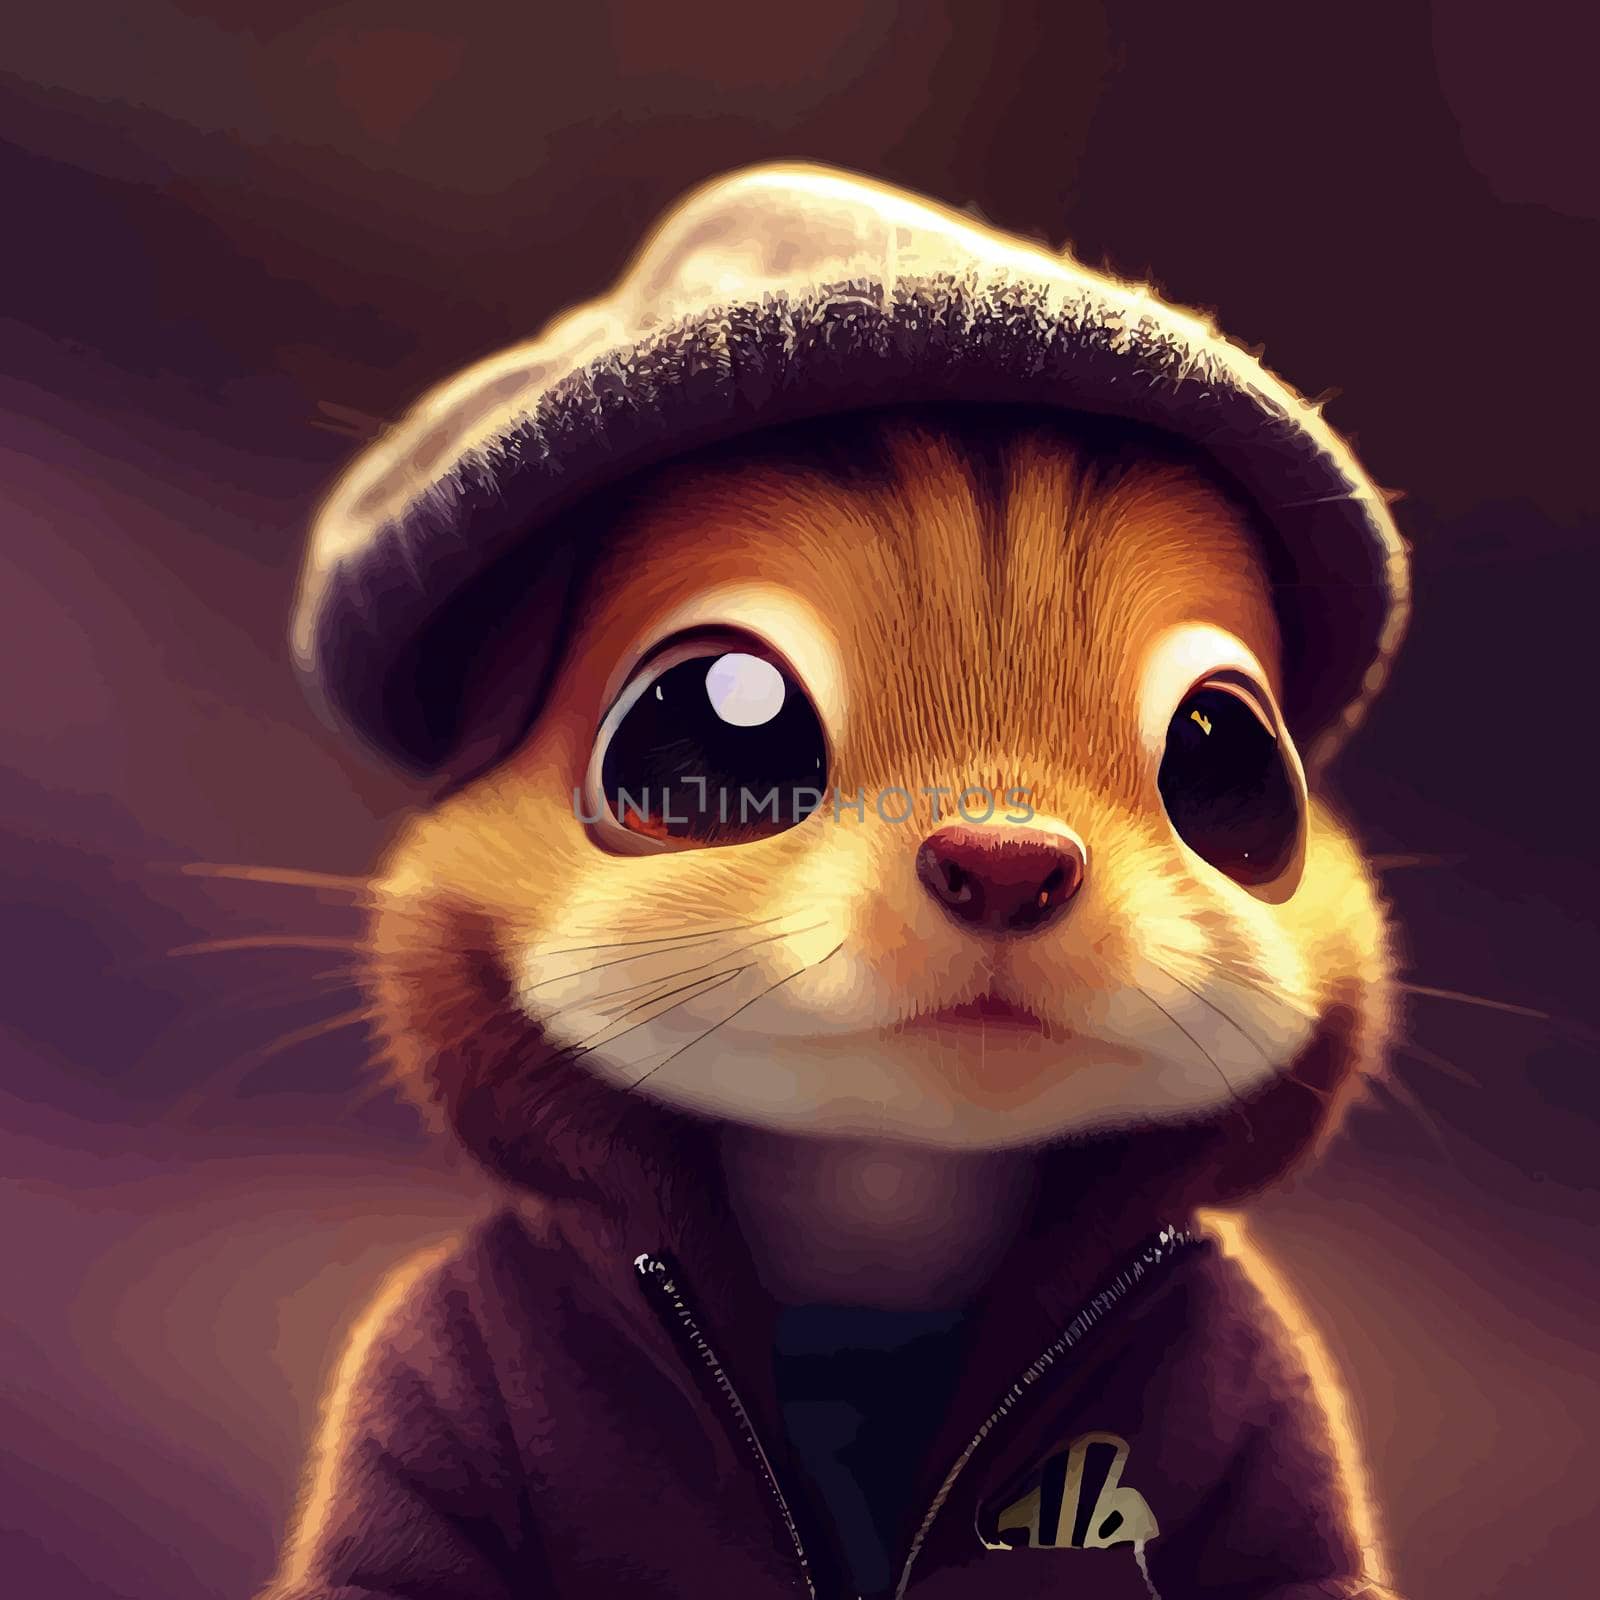 animated illustration of a cute squirrel, animated squirrel portrait by JpRamos